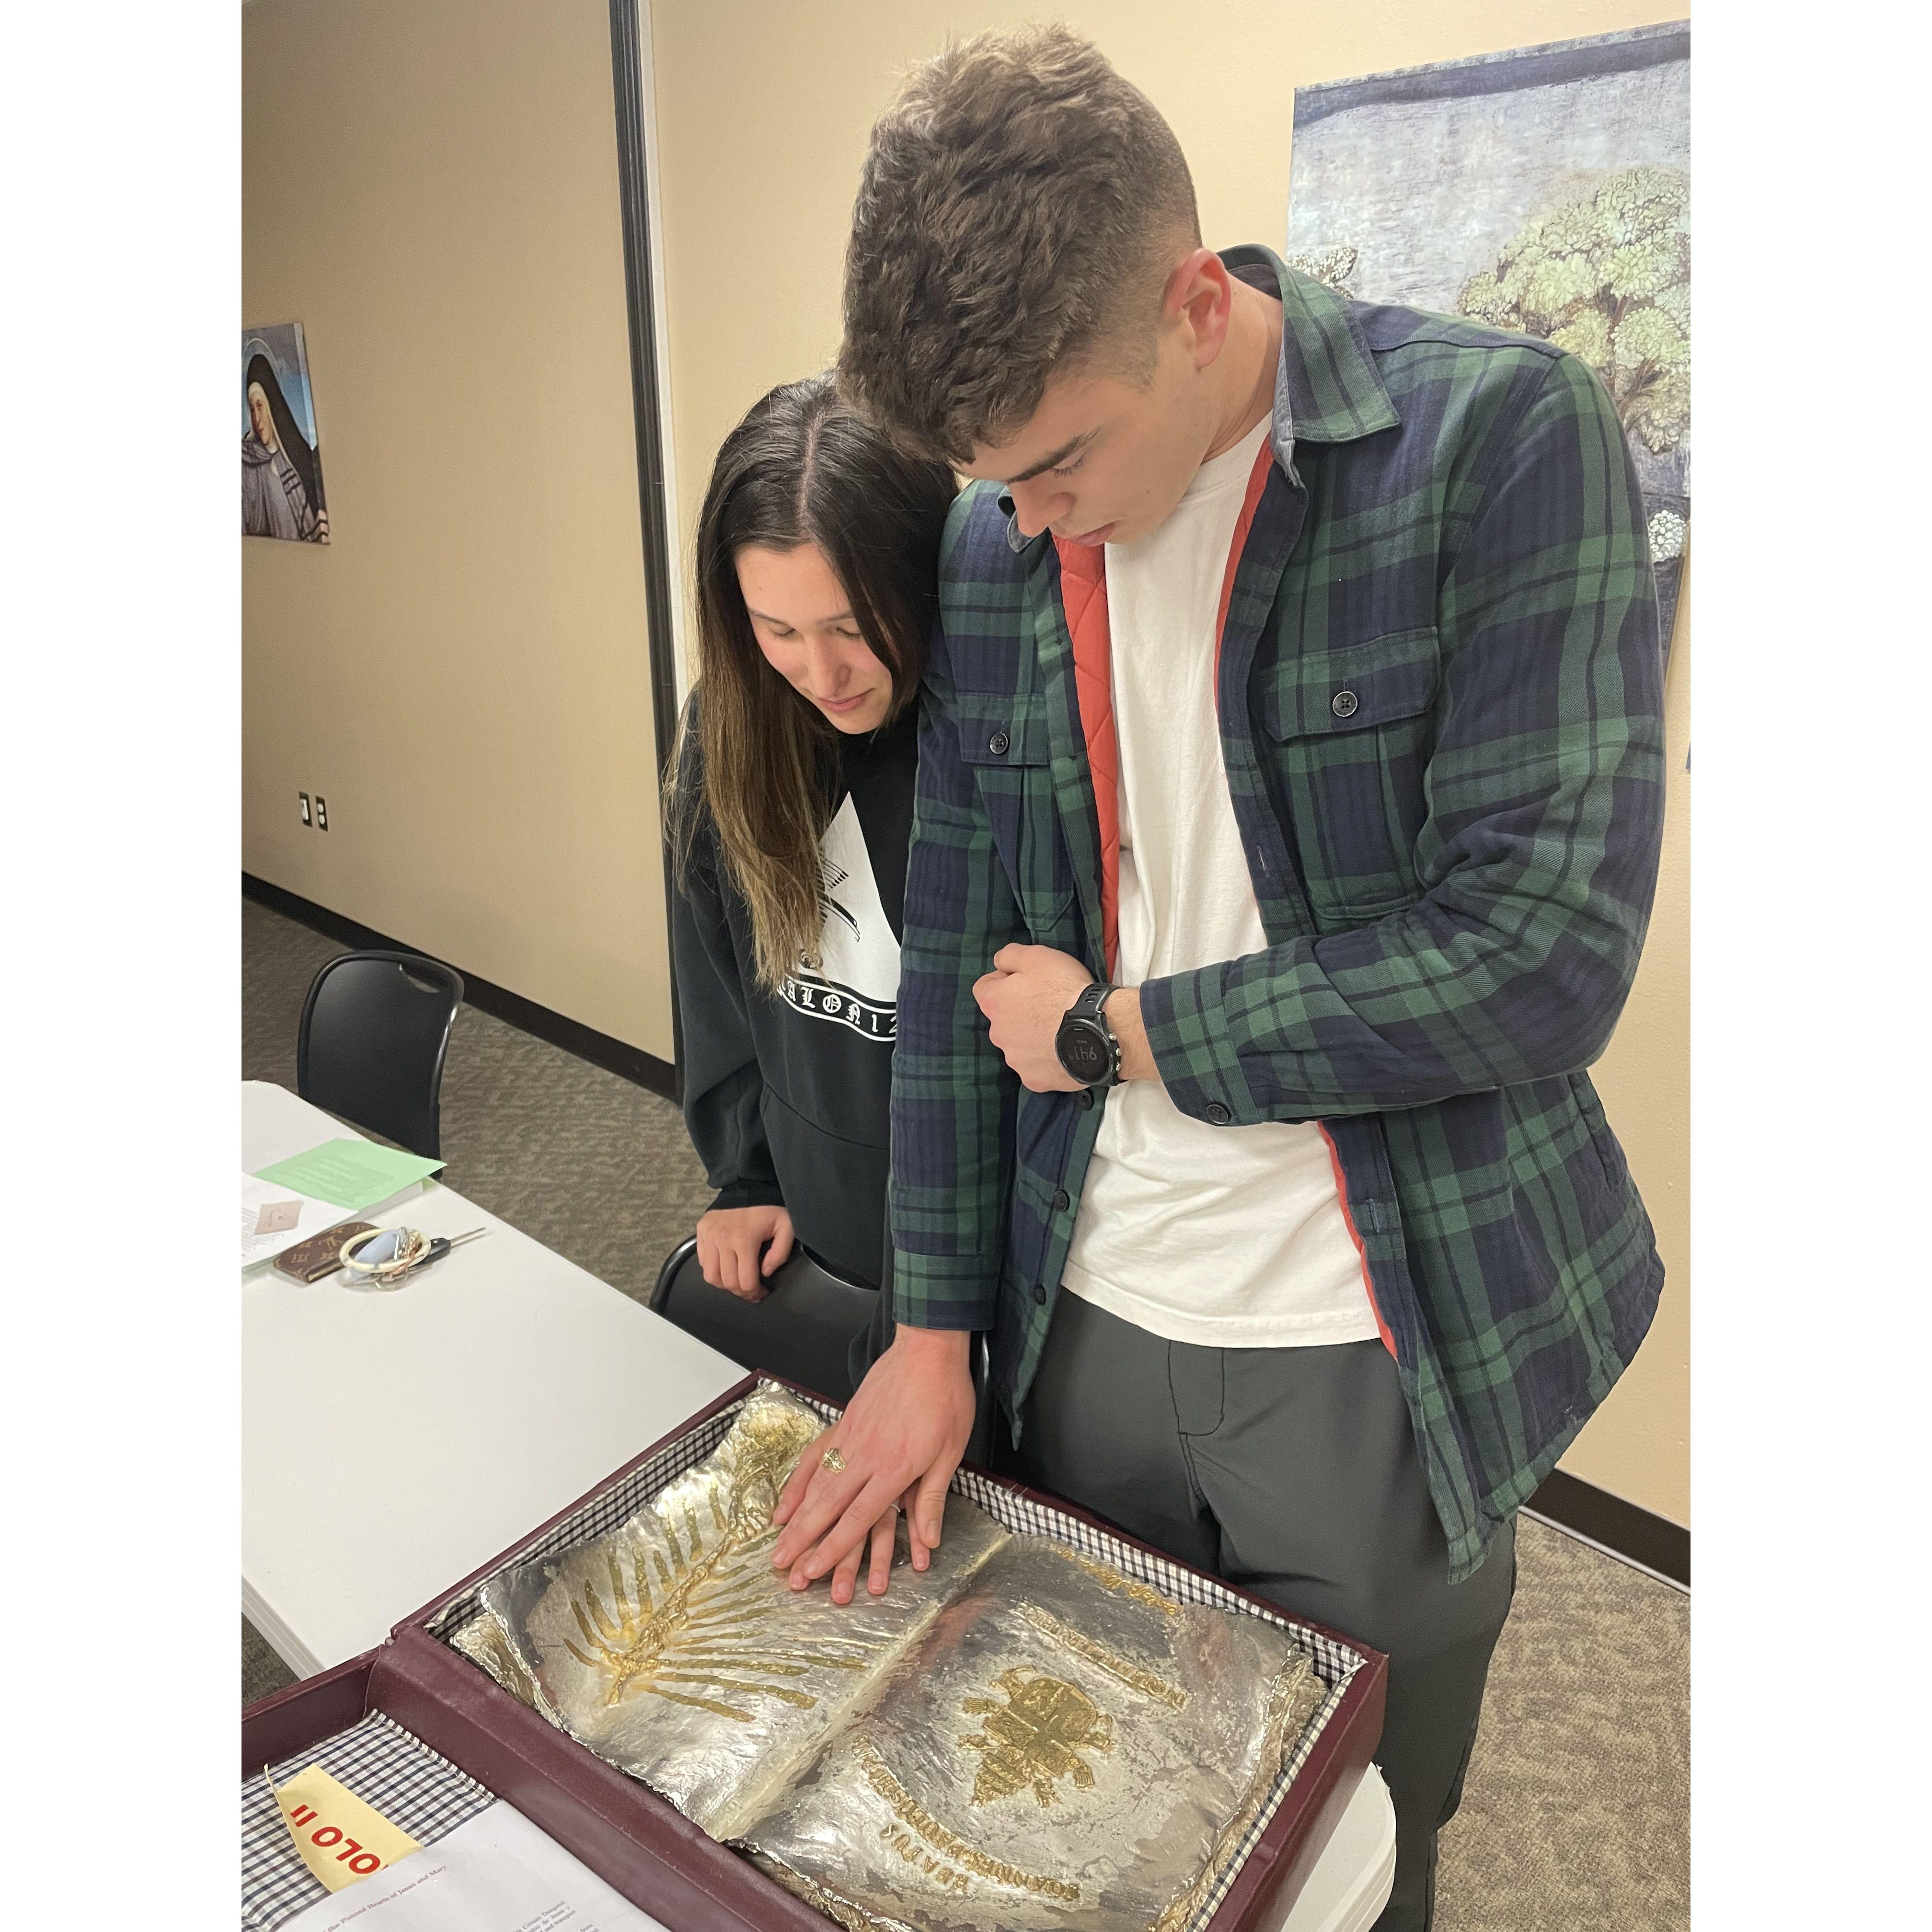 Praying with the only traveling relic of Pope St. John Paul II when he visited Aggieland! A huge thank you to the Servants of the Pierced Hearts of Mary and Jesus for making that possible!